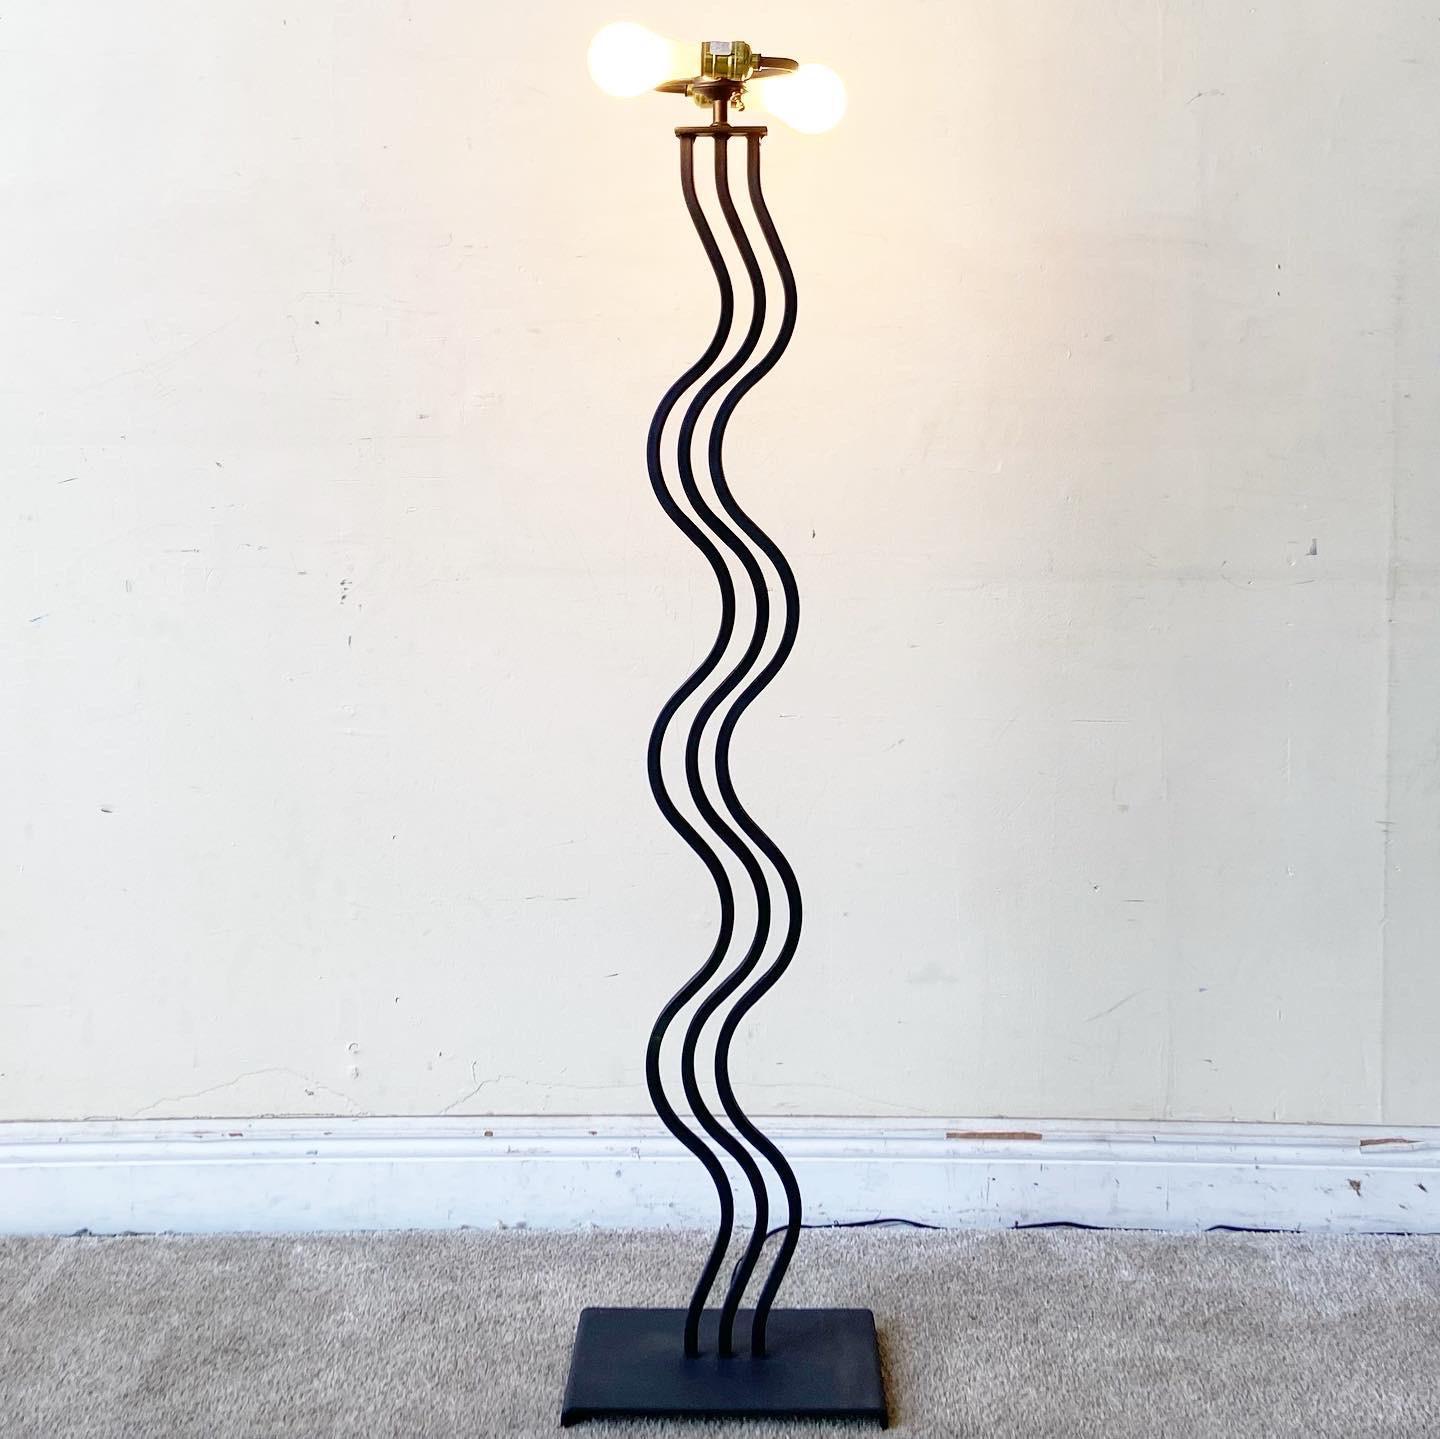 1980s Postmodern Memphis style floor lamp. Sculptural design features a series of curved metal bars in a powder coated matte black finish.

One way lighting